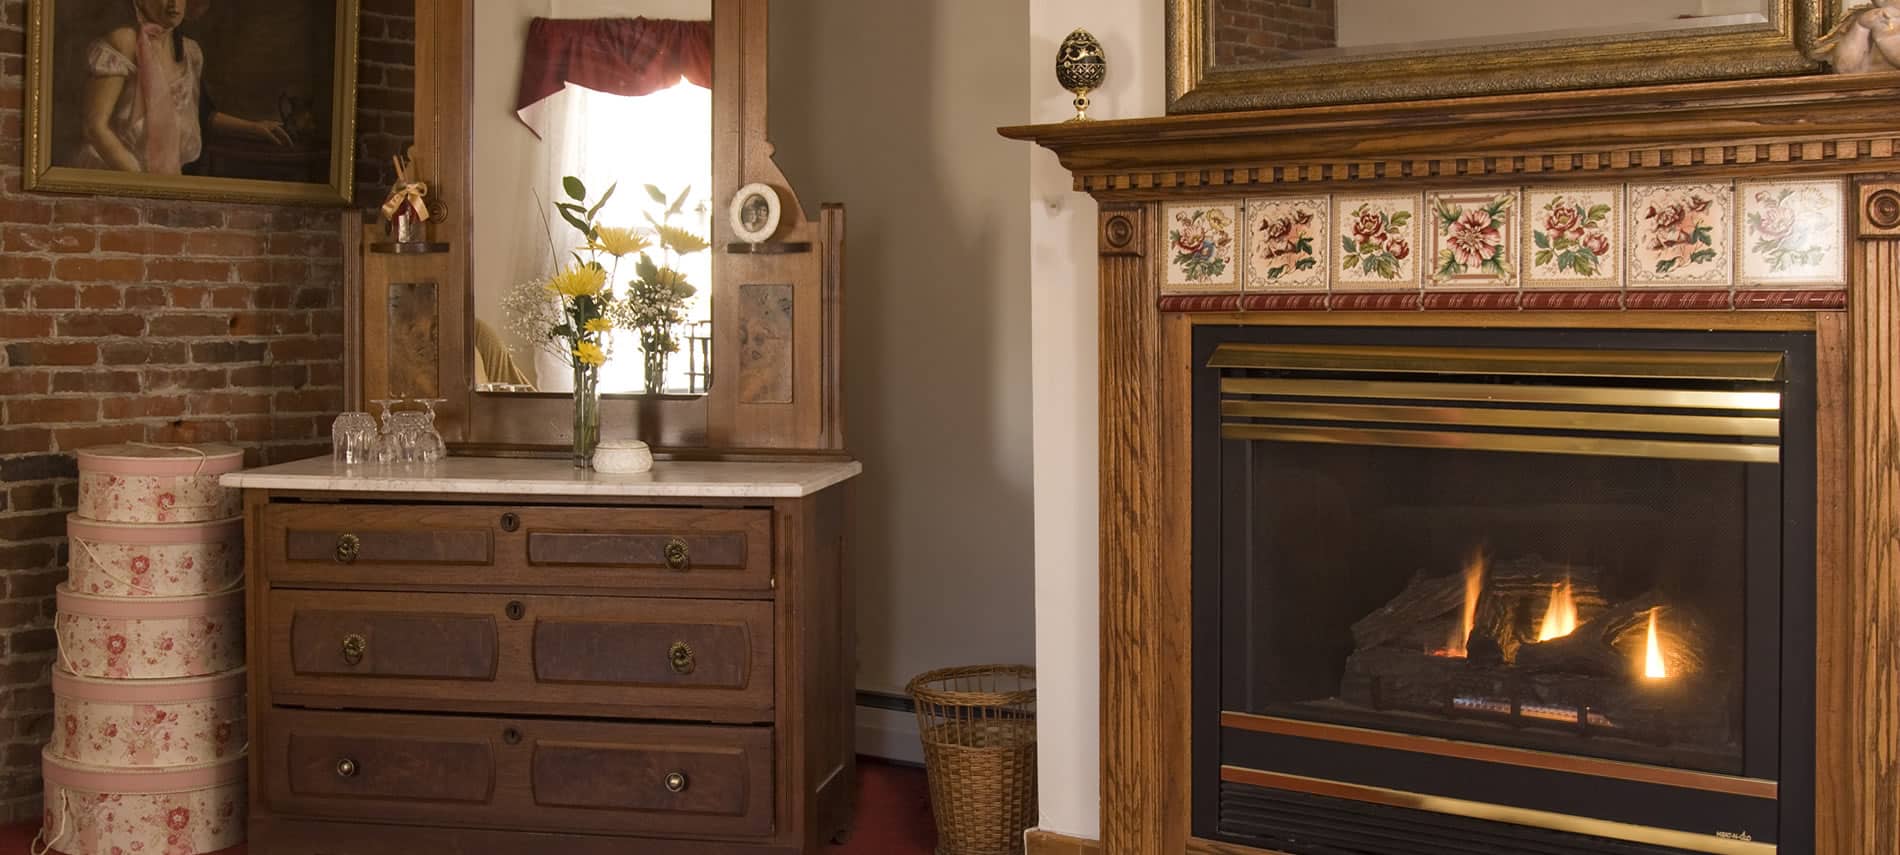 Fireplace with wood wrap around mantel and decorative tile inserts, corner chest with mirror, and brick wall with framed portrait